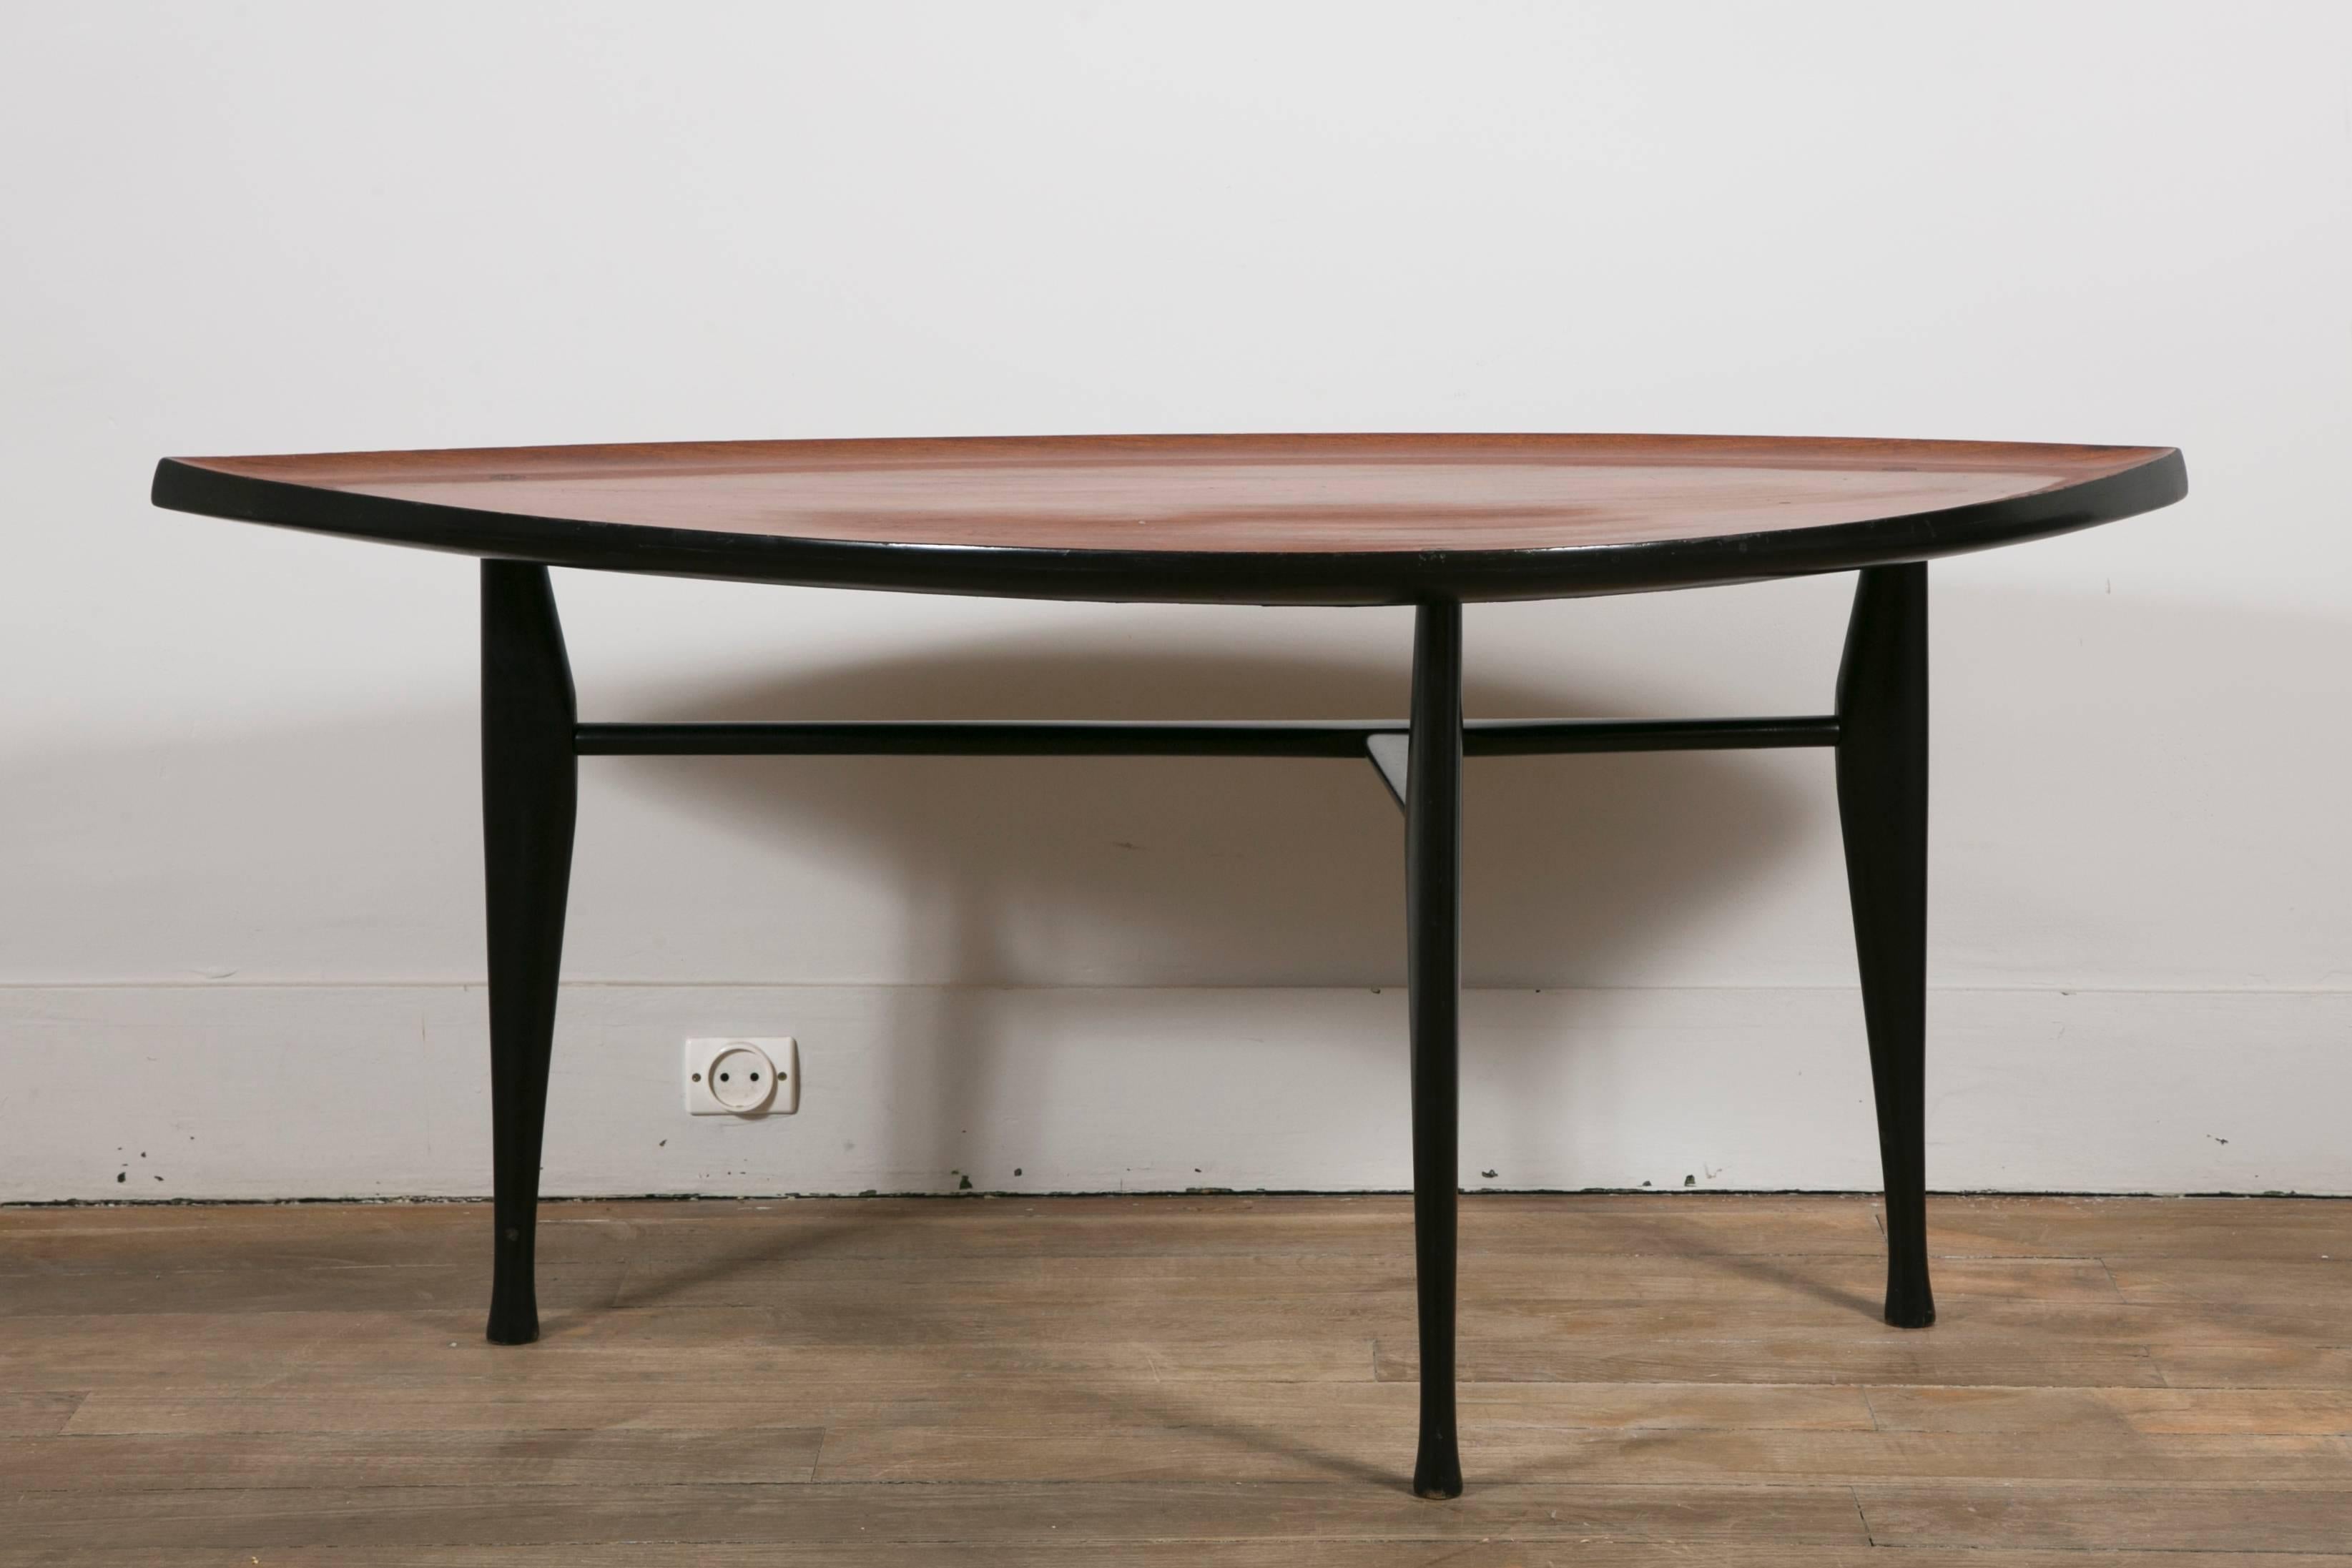 Rosewood leaf shaped top.
Three black lacquered legs.
By Yngve Ekstrom.
Made by Westerbergs Furniture.
Sweden, 1954.
 